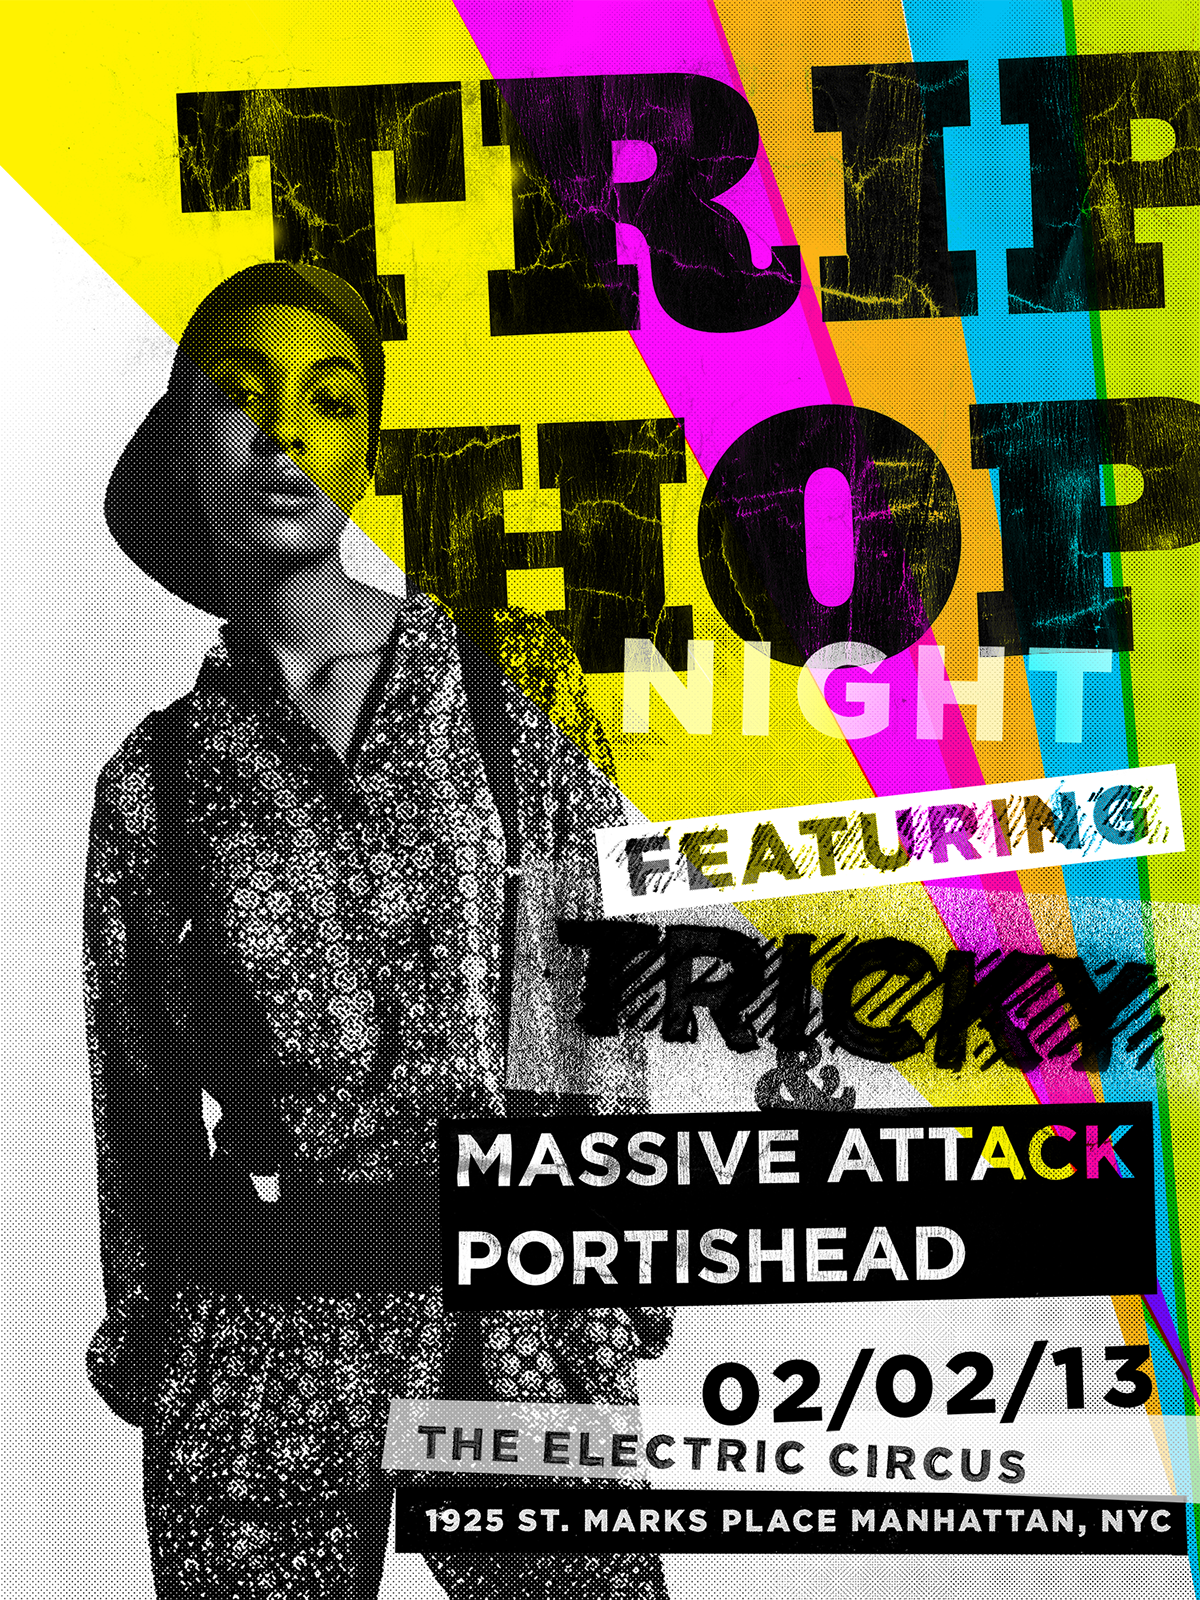 trip hop tricky Massive Attack portishead Electric Circus New York gig venue poster flyer old school